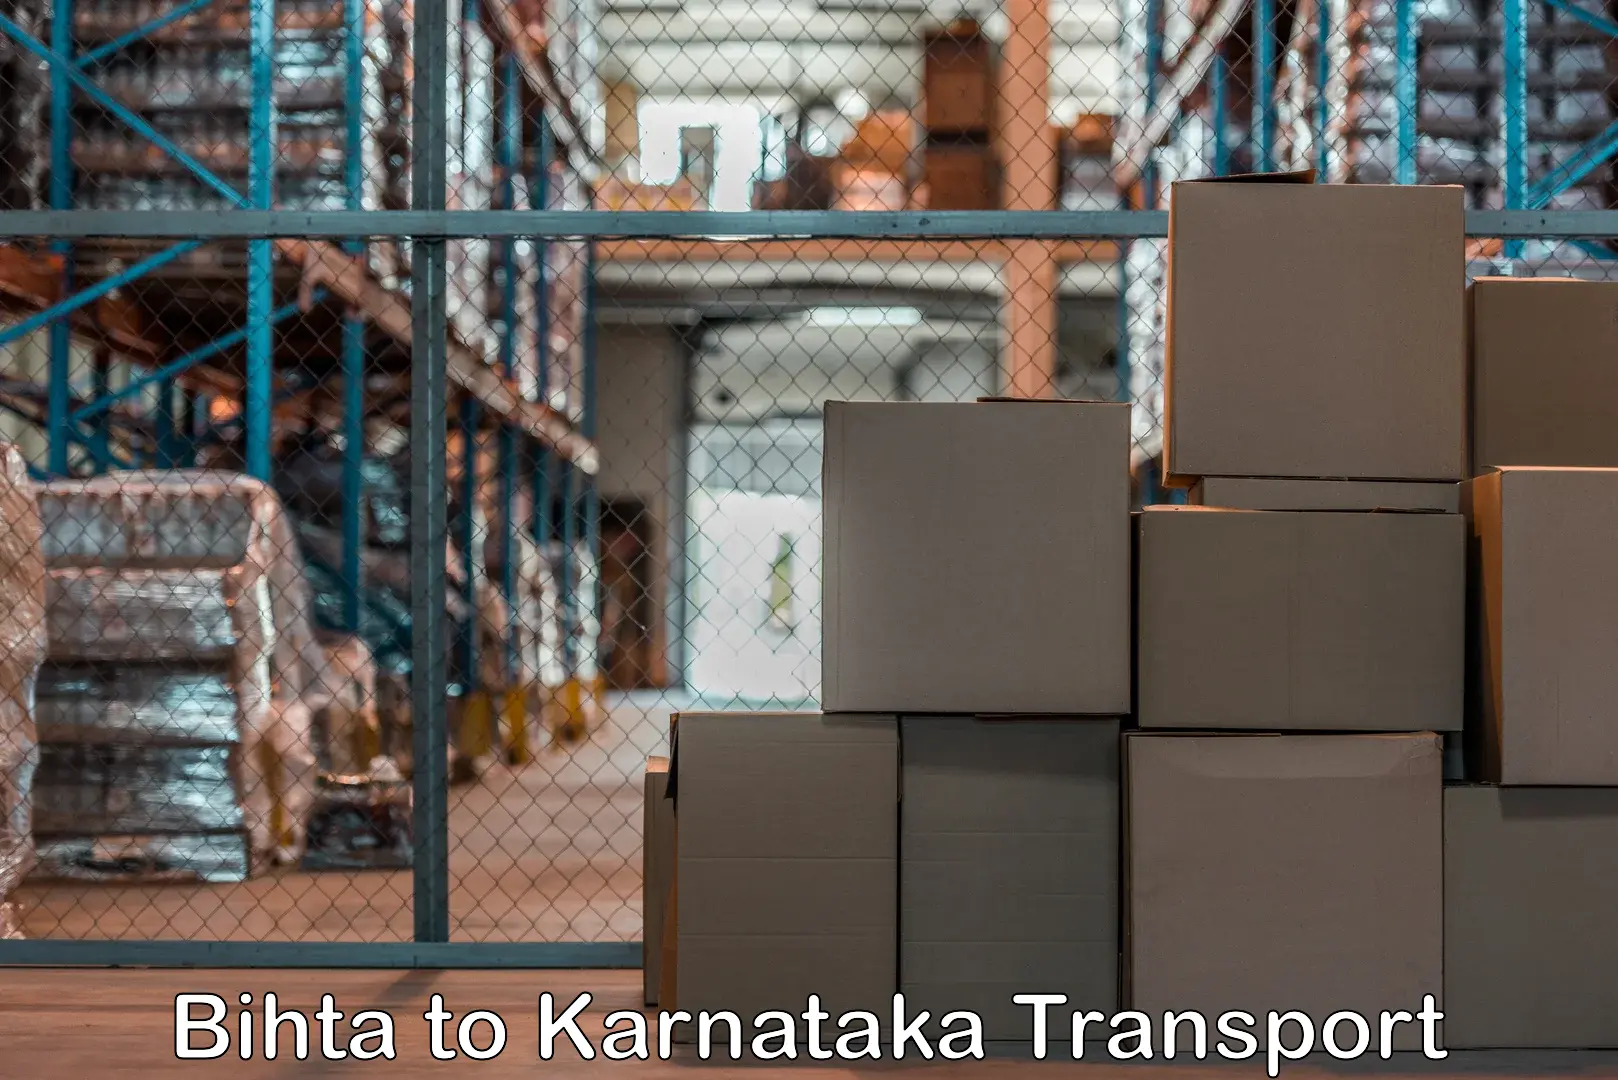 Air freight transport services Bihta to Mangalore Port